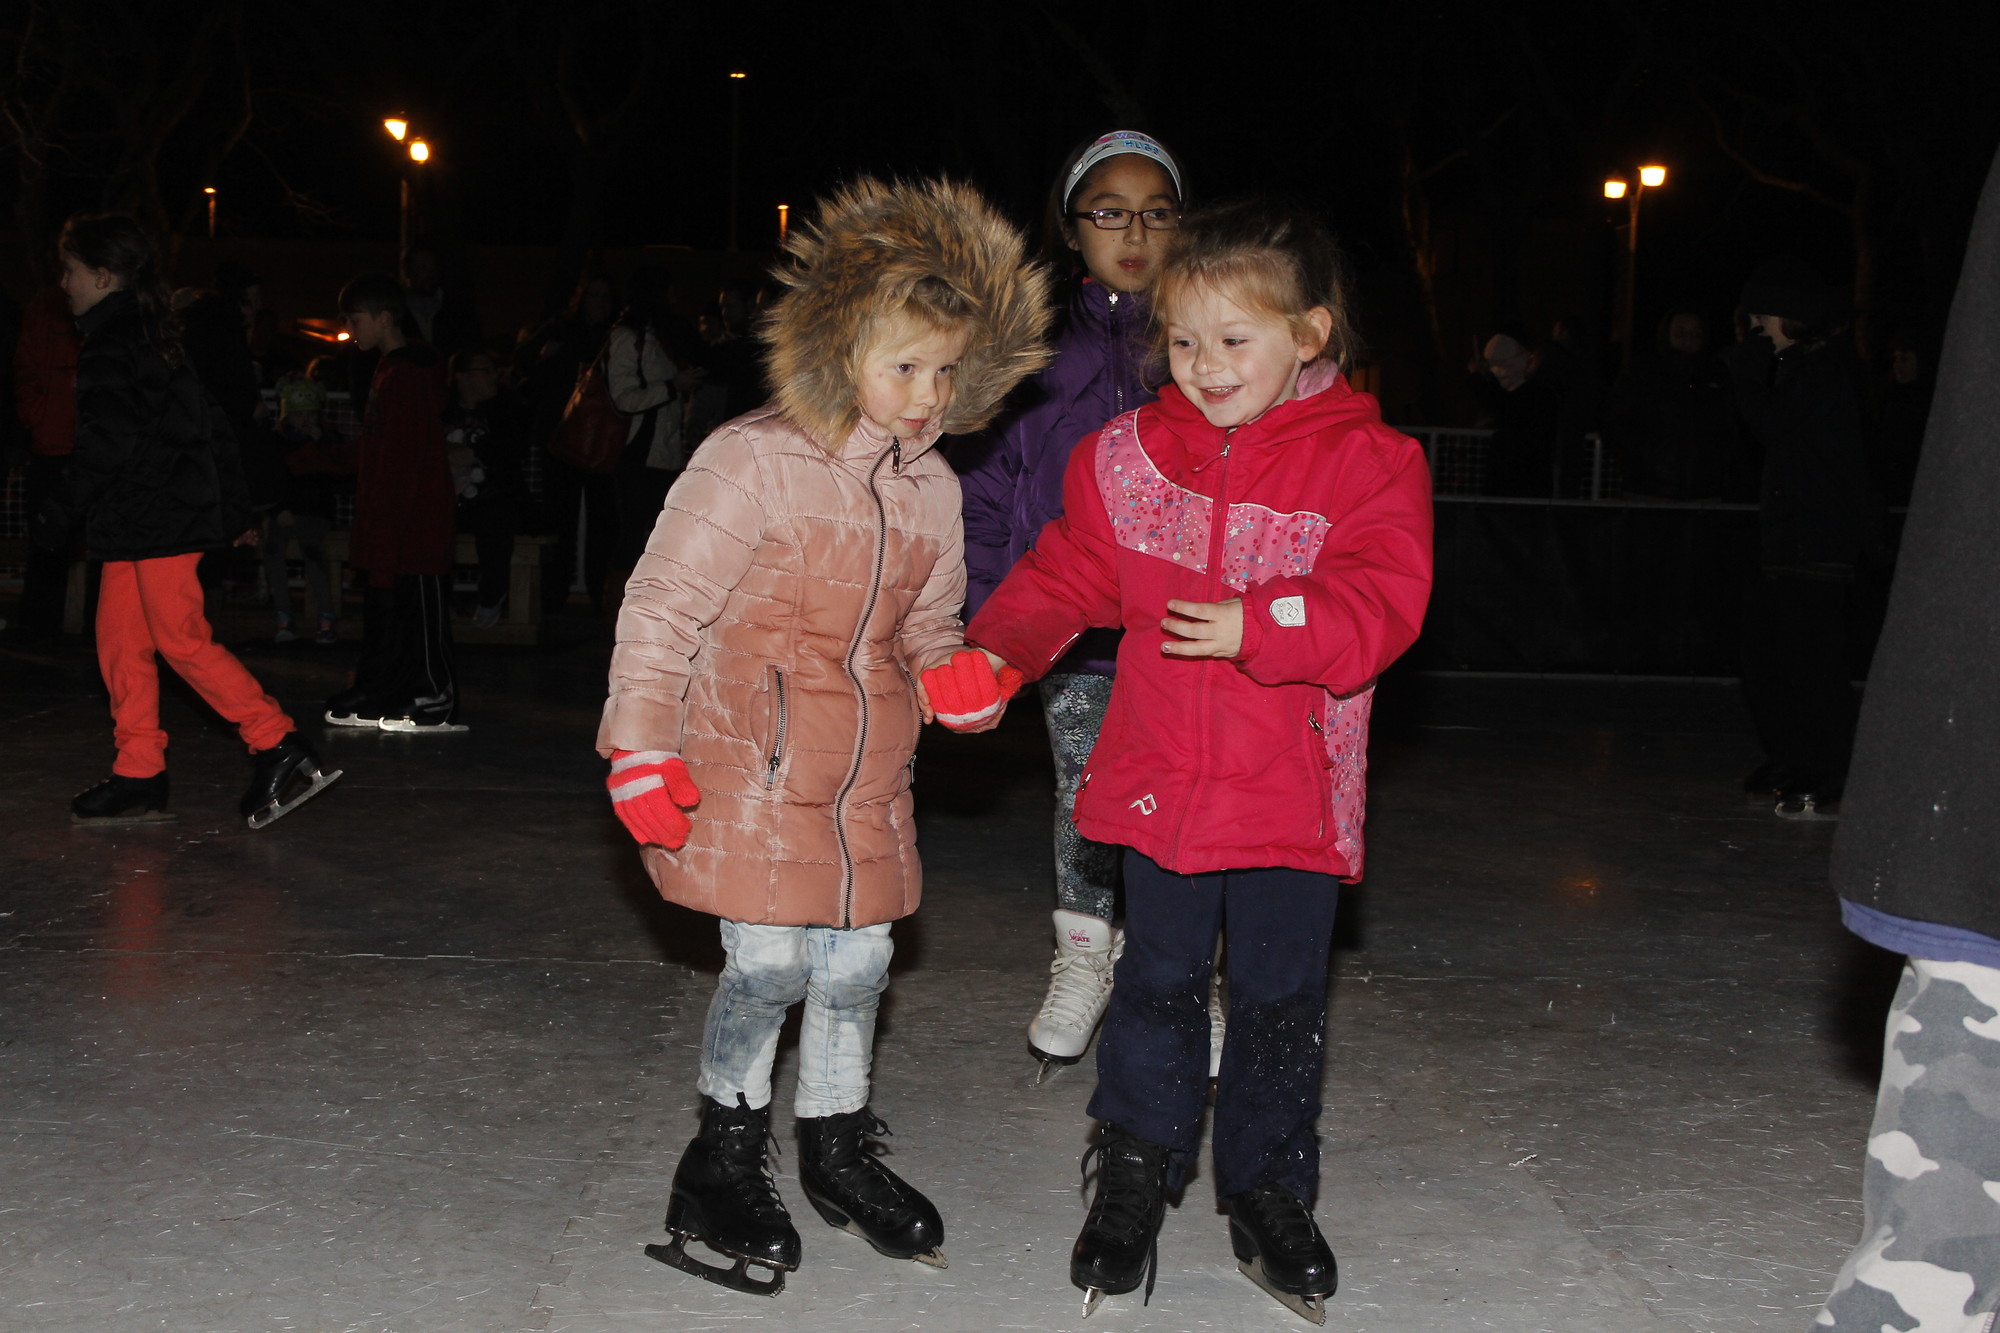 New friends Logan Rodabaugh and Francesca Passaro helped each other around the rink.